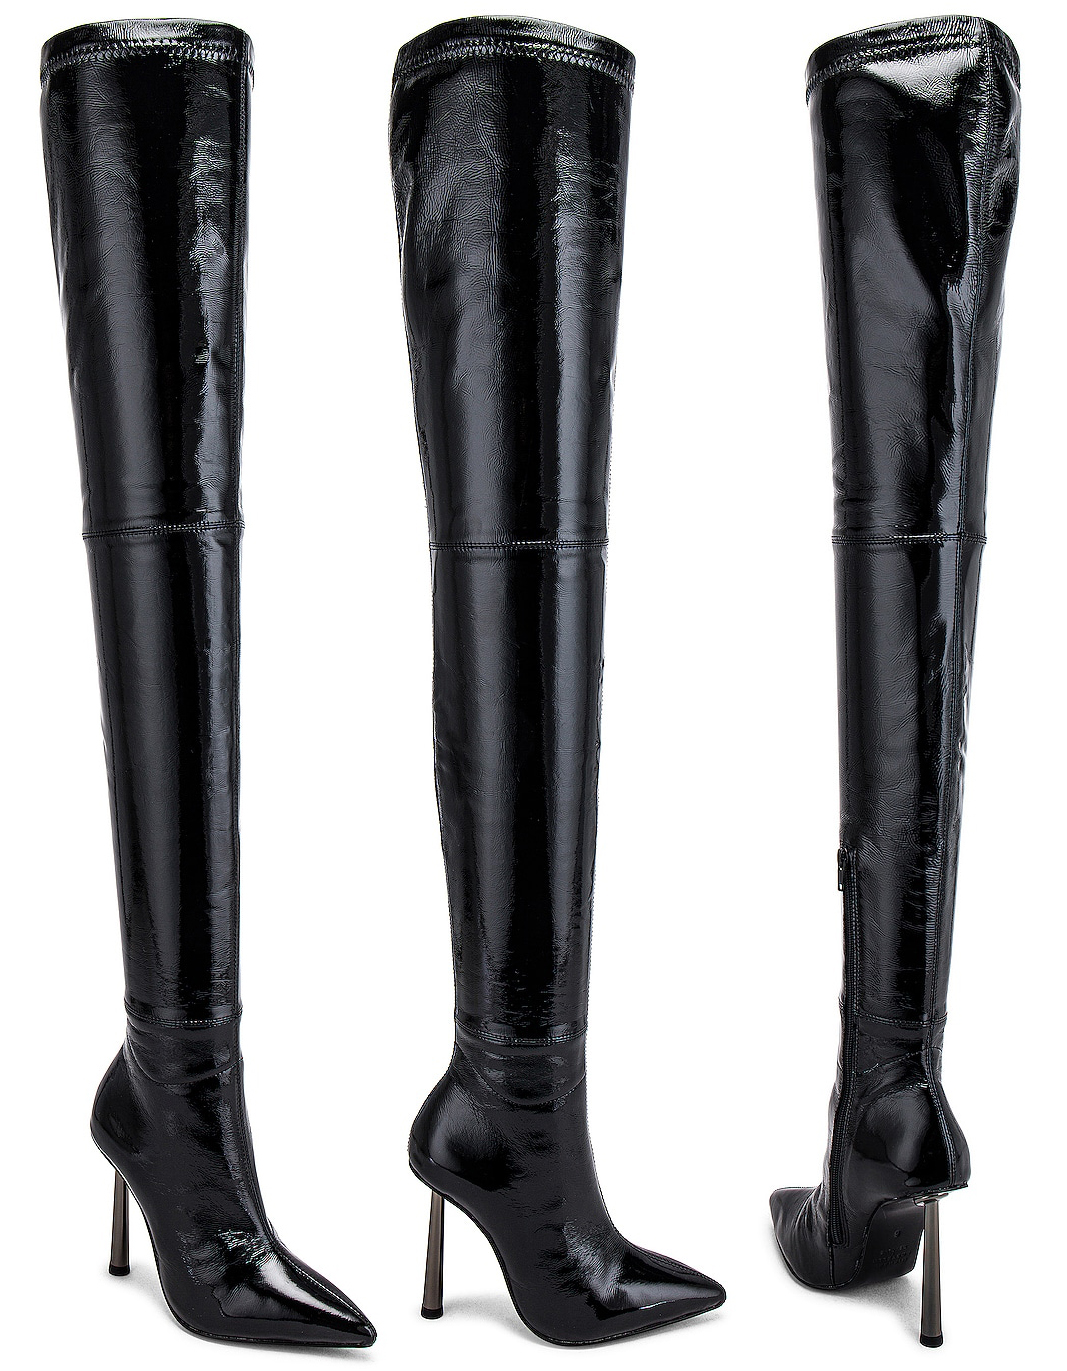 The Marian boots are designed from supple patent leather with a super high over-the-knee styling and metal heels